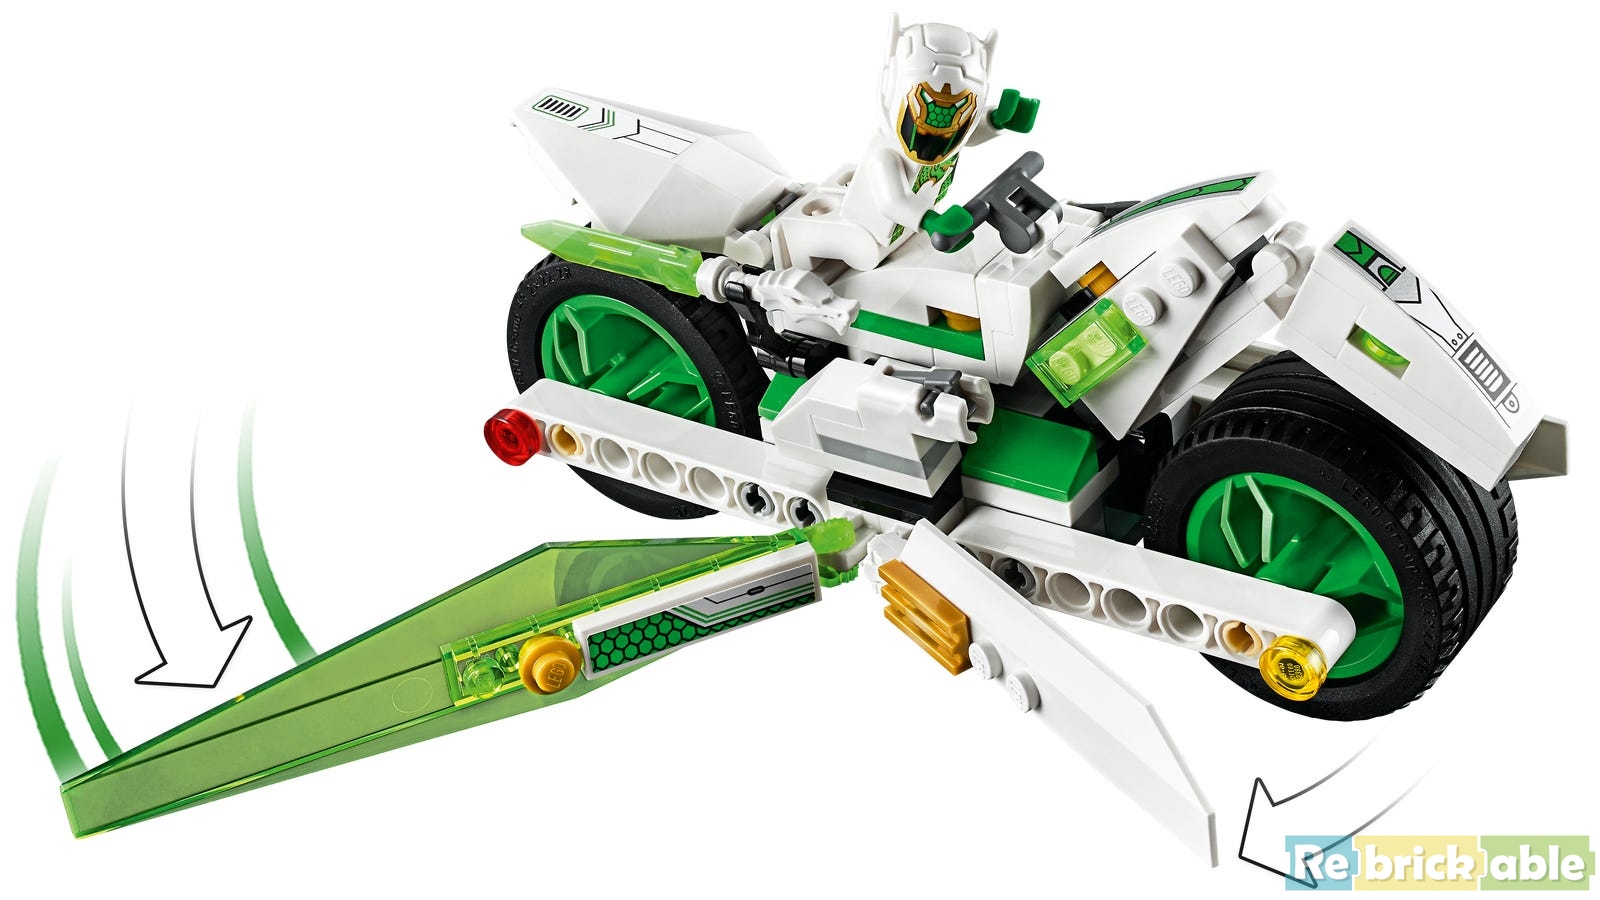 Review: 80031-1 - Mei's Dragon Car | Rebrickable - Build with LEGO